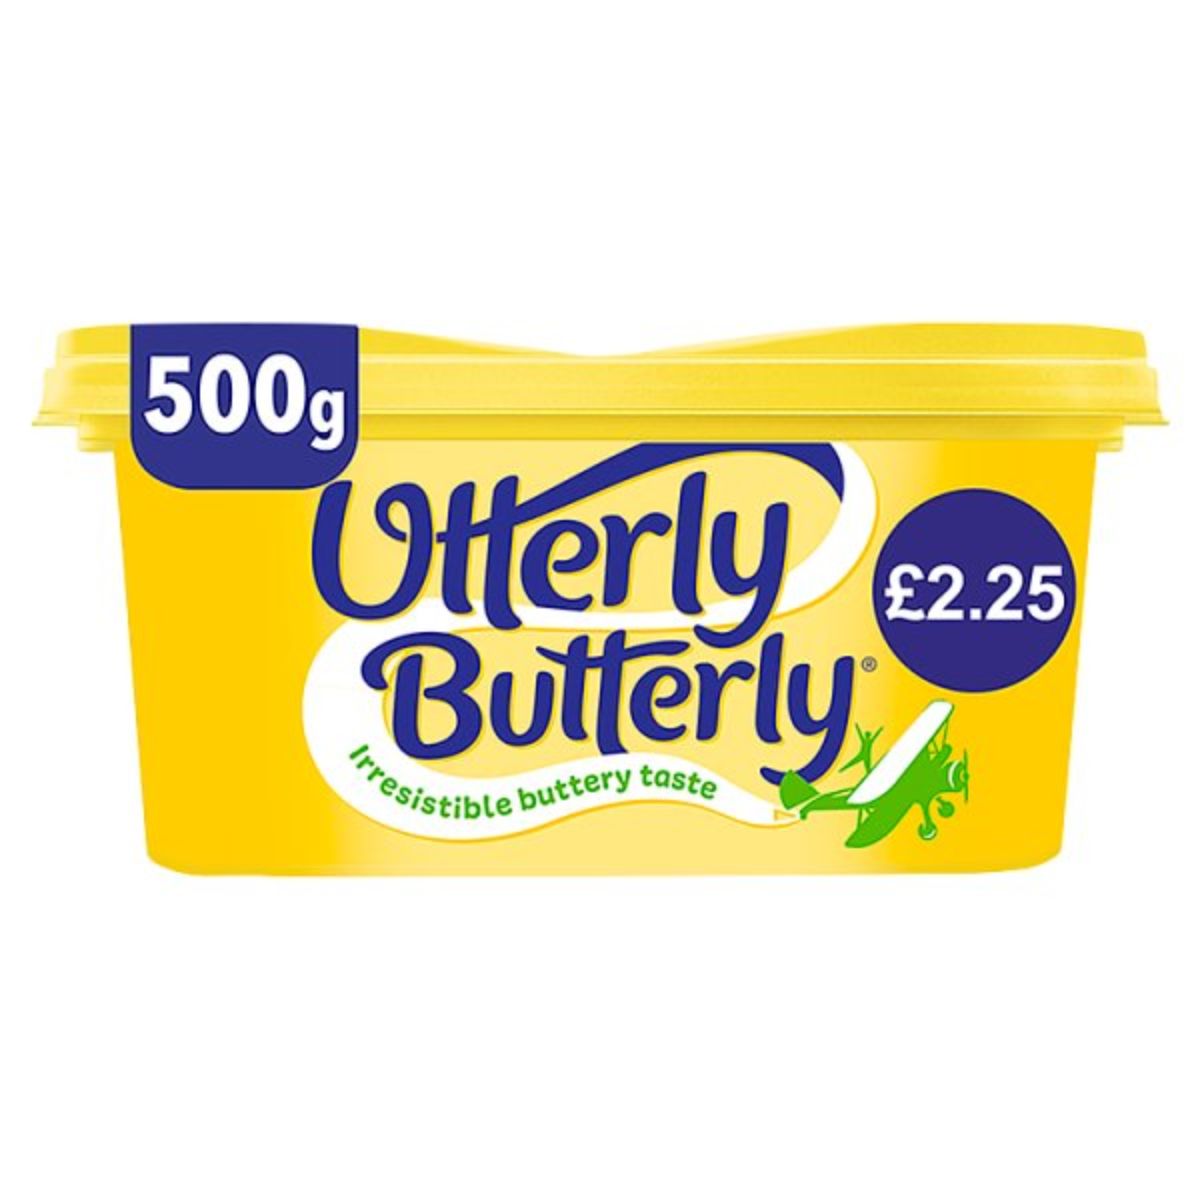 A yellow tub of Utterly Butterly - Spread - 500g.